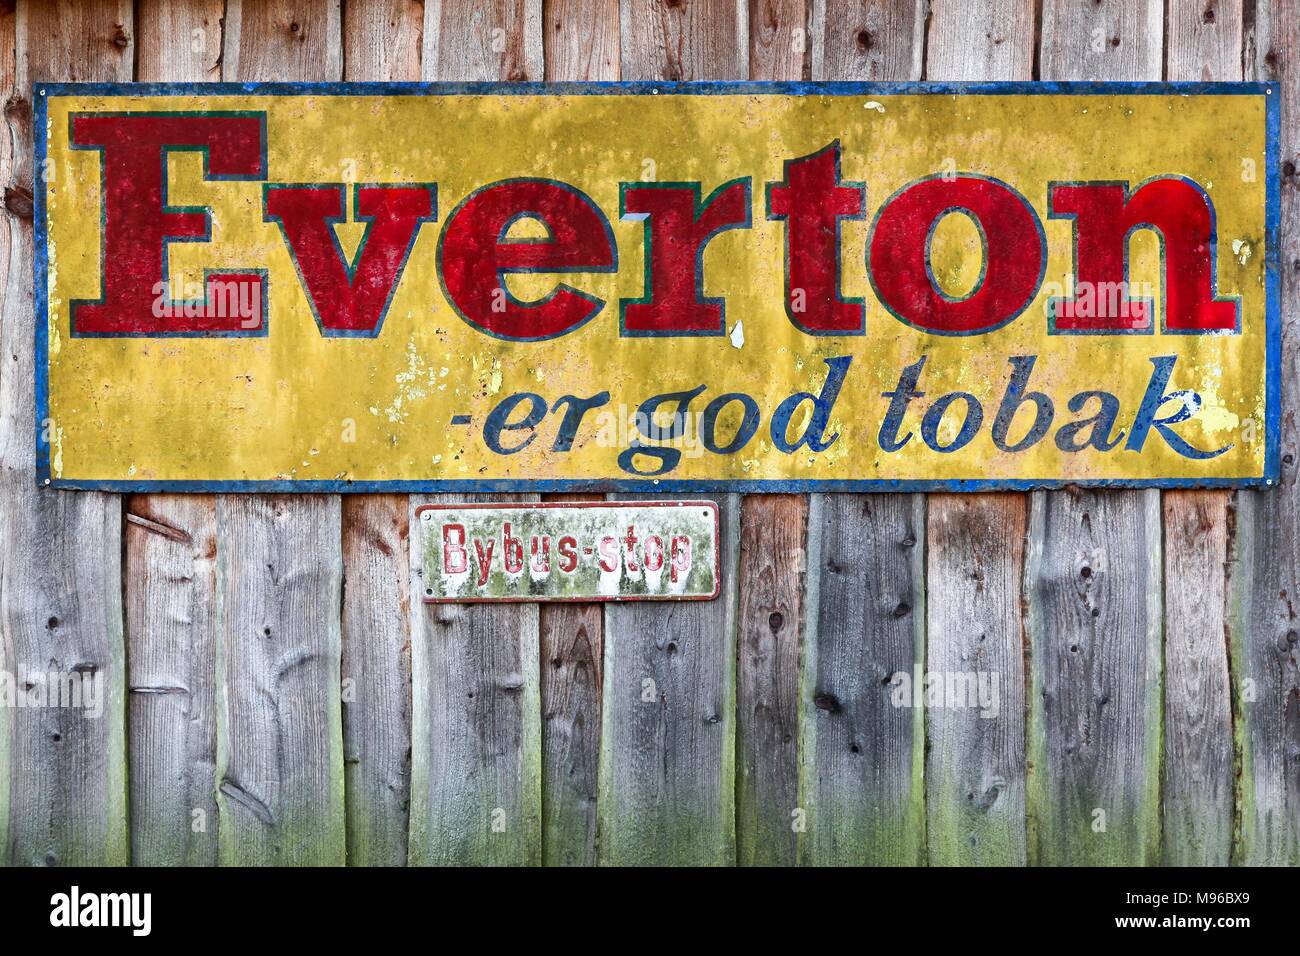 Vejle, Denmark - November 12, 2015:Old advertising of Everton Tobacco on a wooden wall in Denmark Stock Photo